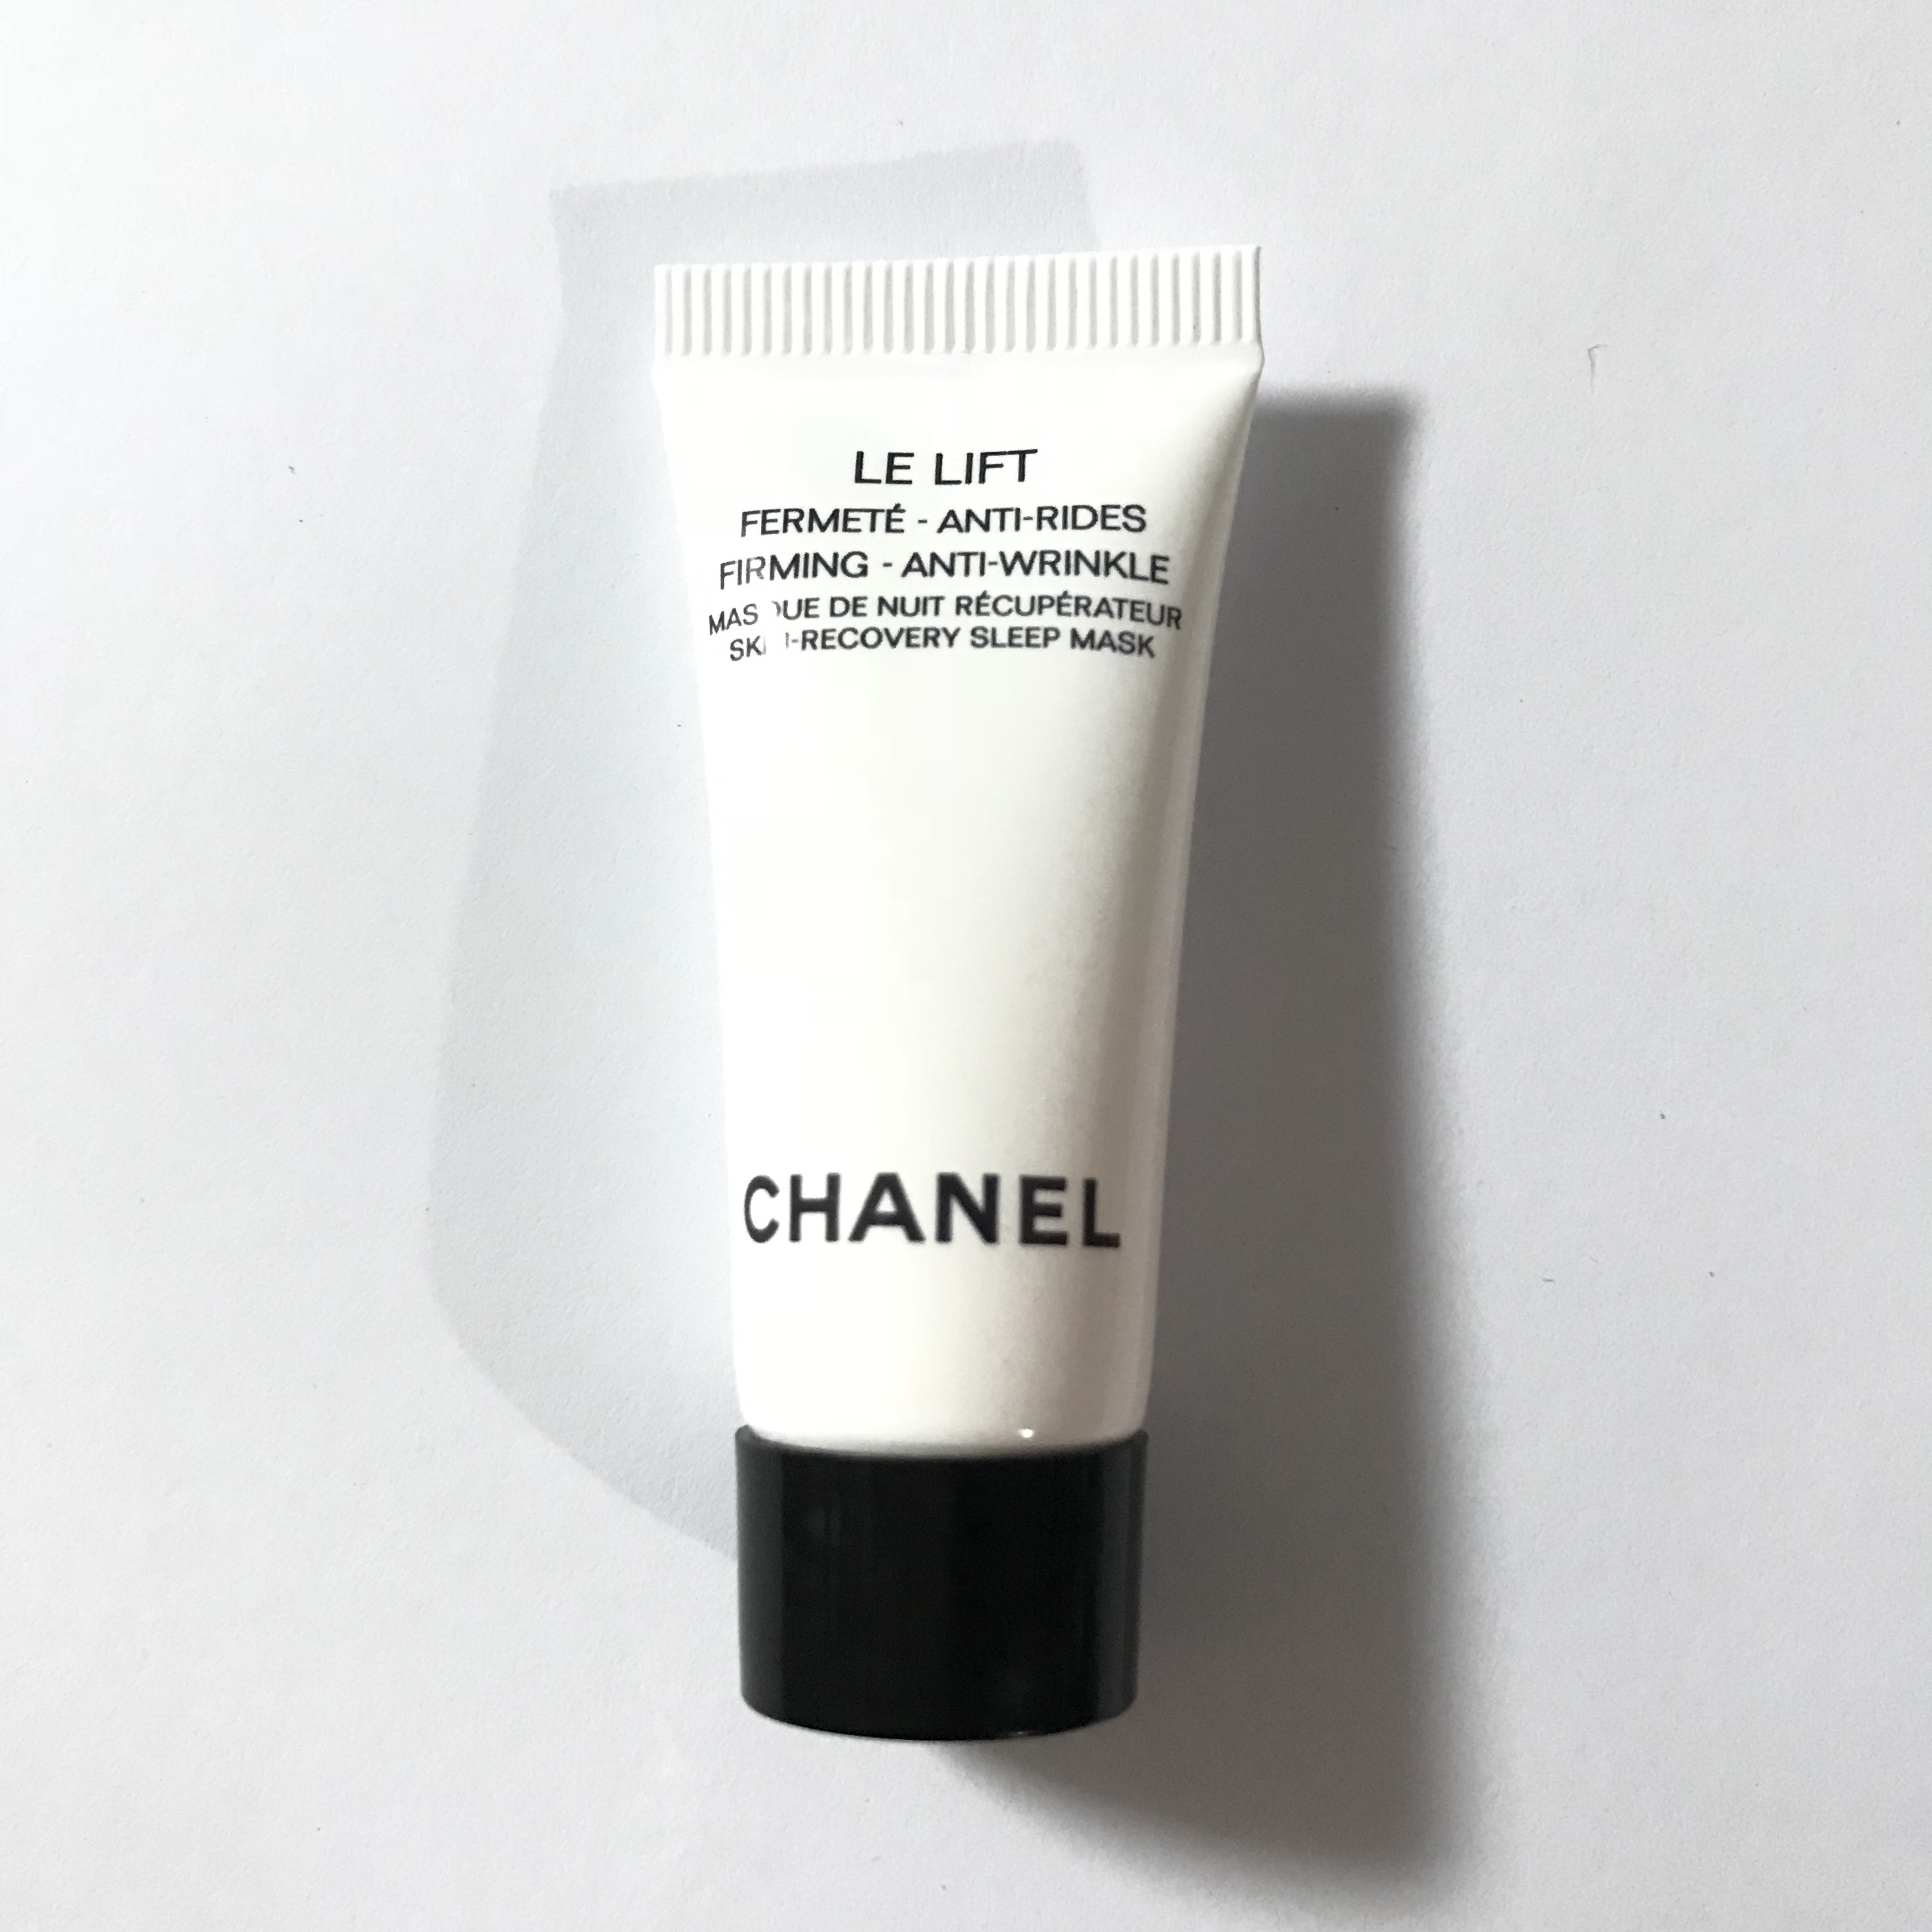 CHANEL LE LIFT SKIN-RECOVERY Sleep Mask for Face, Neck